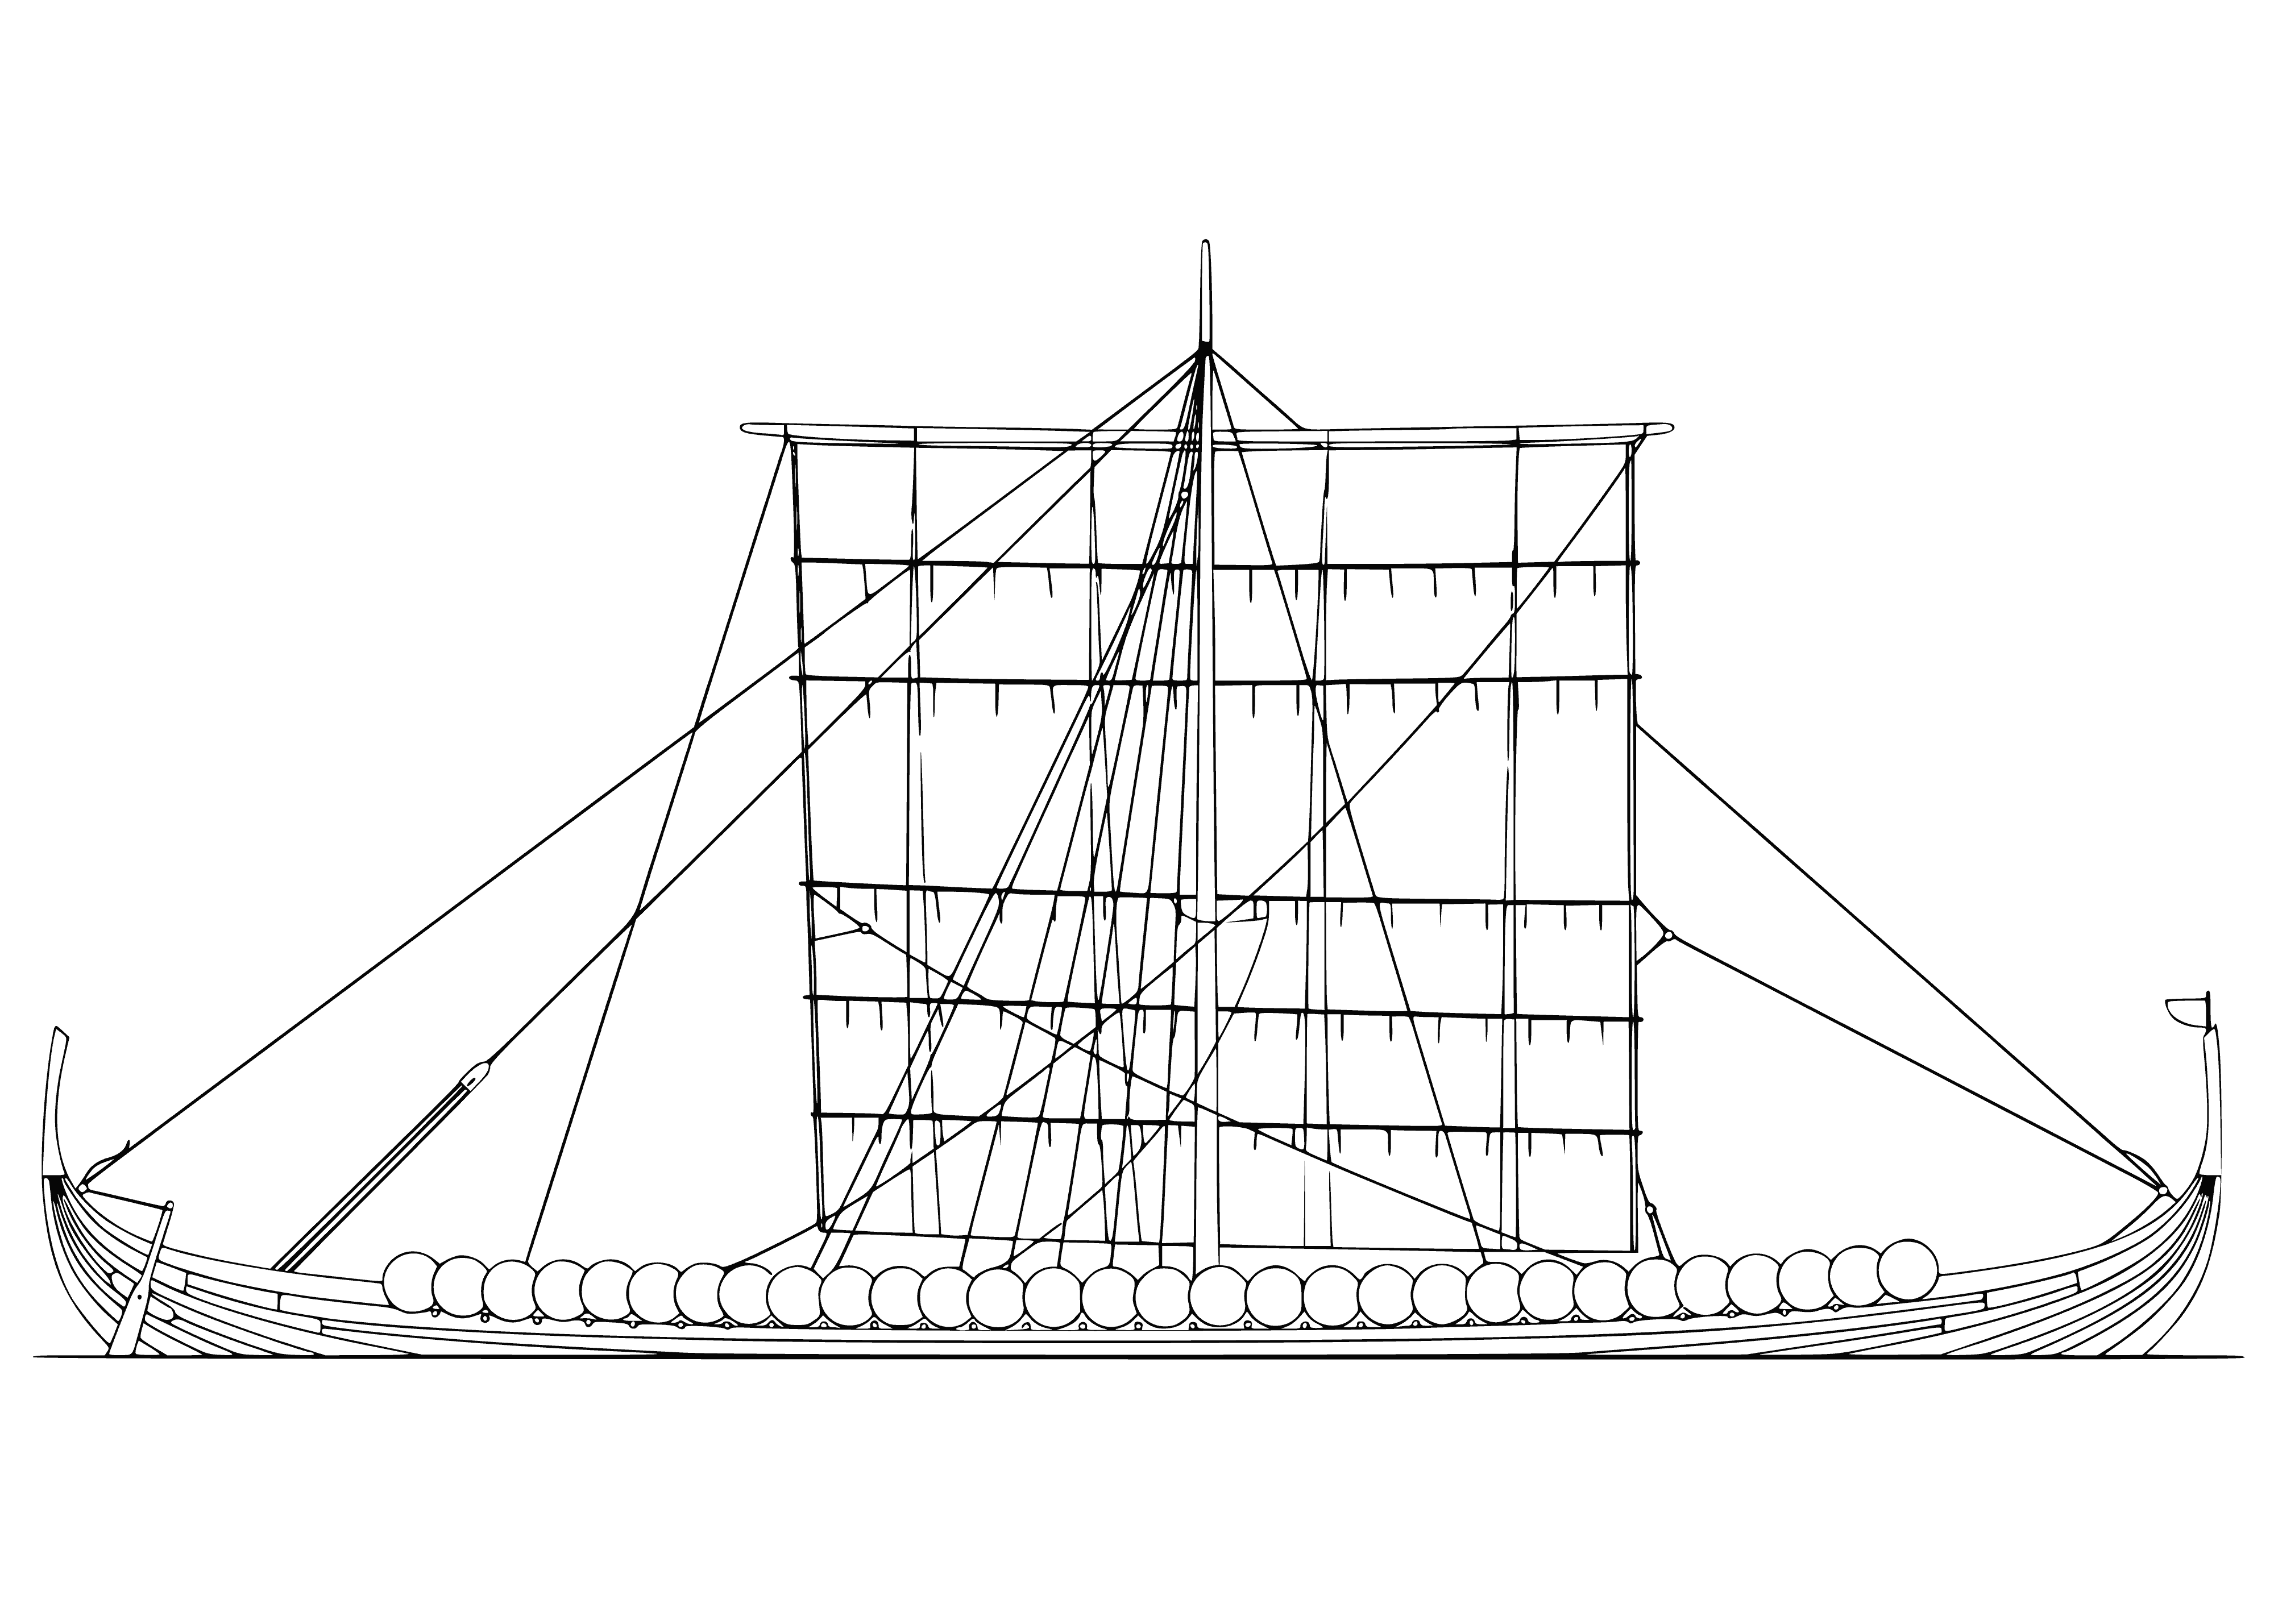 coloring page: Viking battle ship made of wood, square sail, oars, large dragon head on front.